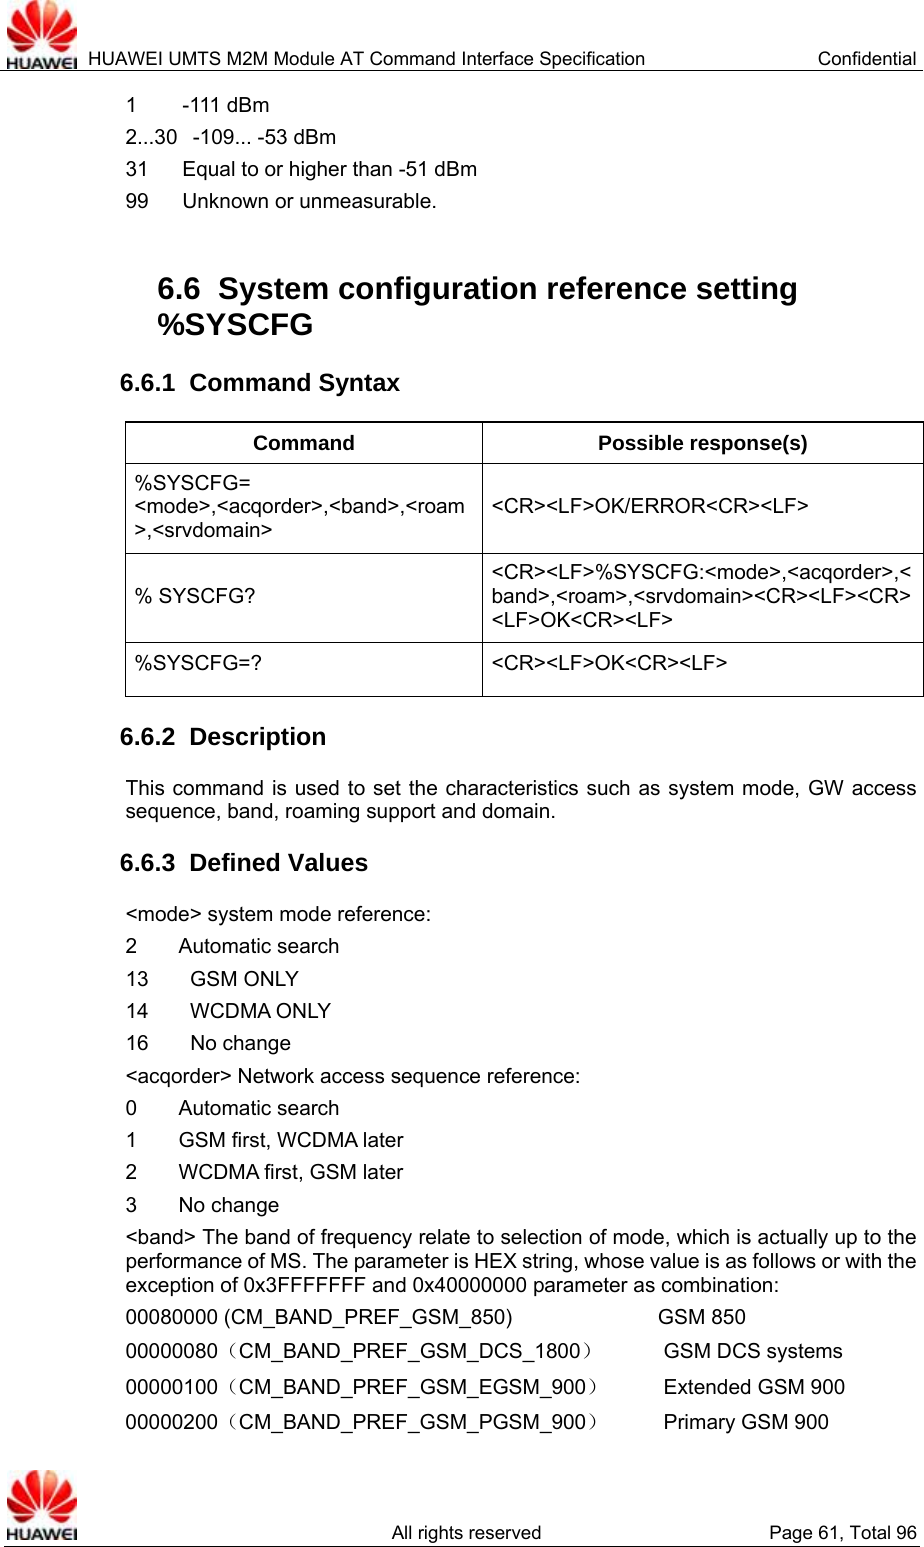  HUAWEI UMTS M2M Module AT Command Interface Specification  Confidential   All rights reserved  Page 61, Total 96 1   -111  dBm 2...30   -109... -53 dBm 31  Equal to or higher than -51 dBm 99  Unknown or unmeasurable.    6.6  System configuration reference setting %SYSCFG  6.6.1  Command Syntax Command Possible response(s) %SYSCFG= &lt;mode&gt;,&lt;acqorder&gt;,&lt;band&gt;,&lt;roam&gt;,&lt;srvdomain&gt; &lt;CR&gt;&lt;LF&gt;OK/ERROR&lt;CR&gt;&lt;LF&gt; % SYSCFG? &lt;CR&gt;&lt;LF&gt;%SYSCFG:&lt;mode&gt;,&lt;acqorder&gt;,&lt;band&gt;,&lt;roam&gt;,&lt;srvdomain&gt;&lt;CR&gt;&lt;LF&gt;&lt;CR&gt;&lt;LF&gt;OK&lt;CR&gt;&lt;LF&gt; %SYSCFG=? &lt;CR&gt;&lt;LF&gt;OK&lt;CR&gt;&lt;LF&gt; 6.6.2  Description This command is used to set the characteristics such as system mode, GW access sequence, band, roaming support and domain.   6.6.3  Defined Values &lt;mode&gt; system mode reference:   2    Automatic search 13    GSM ONLY 14    WCDMA ONLY 16    No change &lt;acqorder&gt; Network access sequence reference:   0    Automatic search 1    GSM first, WCDMA later 2    WCDMA first, GSM later 3    No change &lt;band&gt; The band of frequency relate to selection of mode, which is actually up to the performance of MS. The parameter is HEX string, whose value is as follows or with the exception of 0x3FFFFFFF and 0x40000000 parameter as combination: 00080000 (CM_BAND_PREF_GSM_850)              GSM 850 00000080（CM_BAND_PREF_GSM_DCS_1800）   GSM DCS systems 00000100（CM_BAND_PREF_GSM_EGSM_900）    Extended GSM 900 00000200（CM_BAND_PREF_GSM_PGSM_900）    Primary GSM 900   